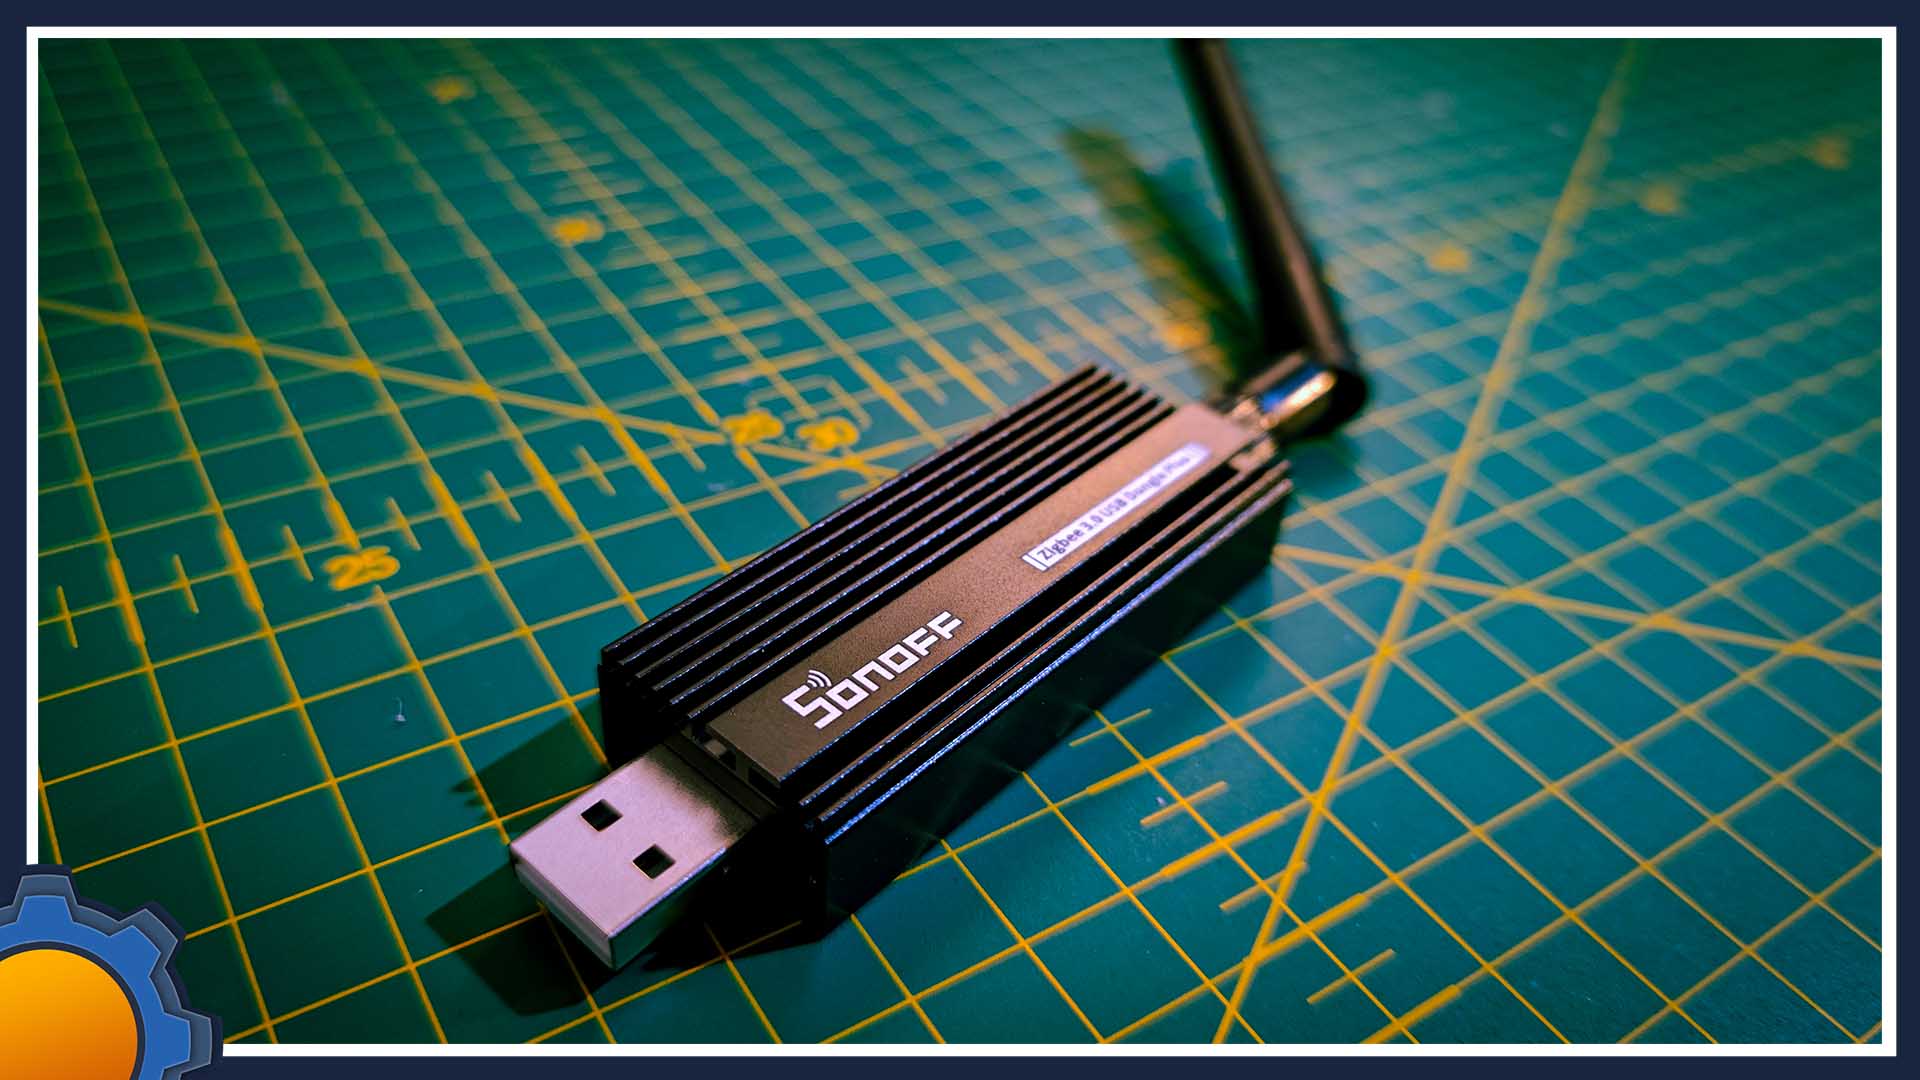 Getting with Sonoff ZIGBEE 3.0 USB DONGLE PLUS NotEnoughTech